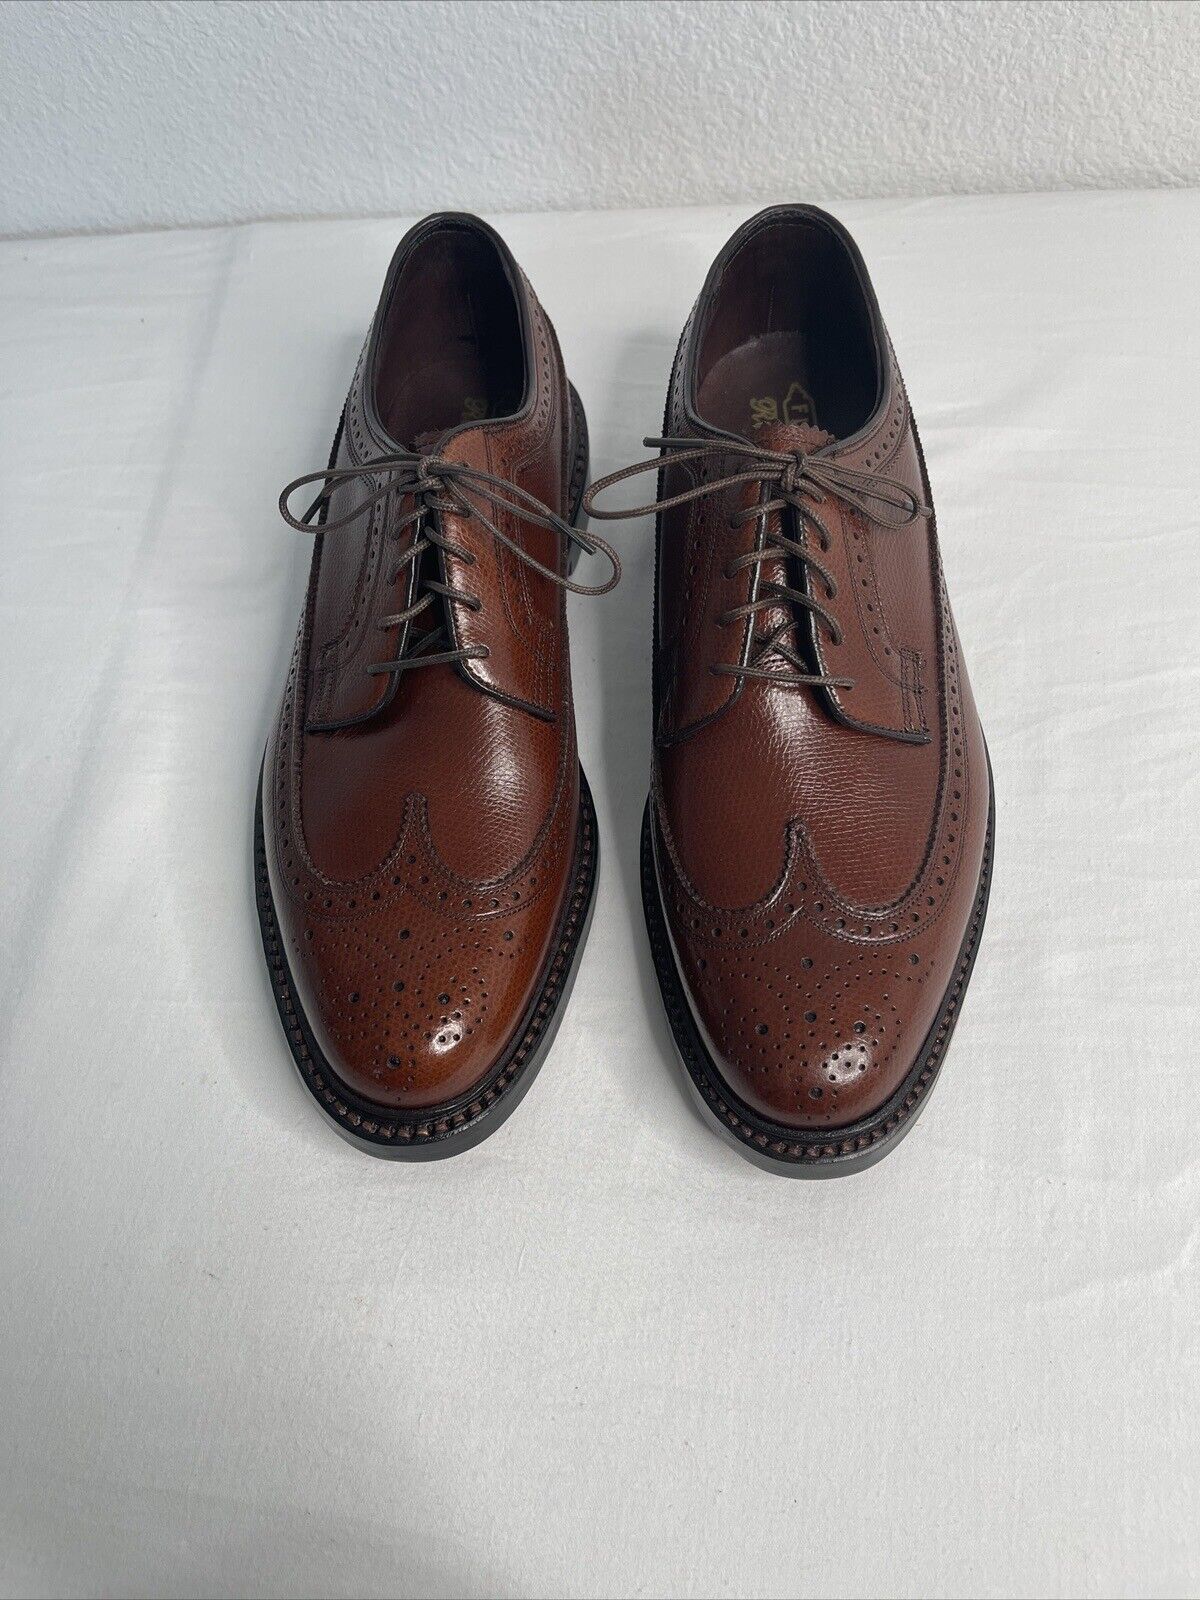 Vintage Florsheim Royal Imperial 97625 Long Wing5 Nail V Cleat Brown Shoes 8.5 D